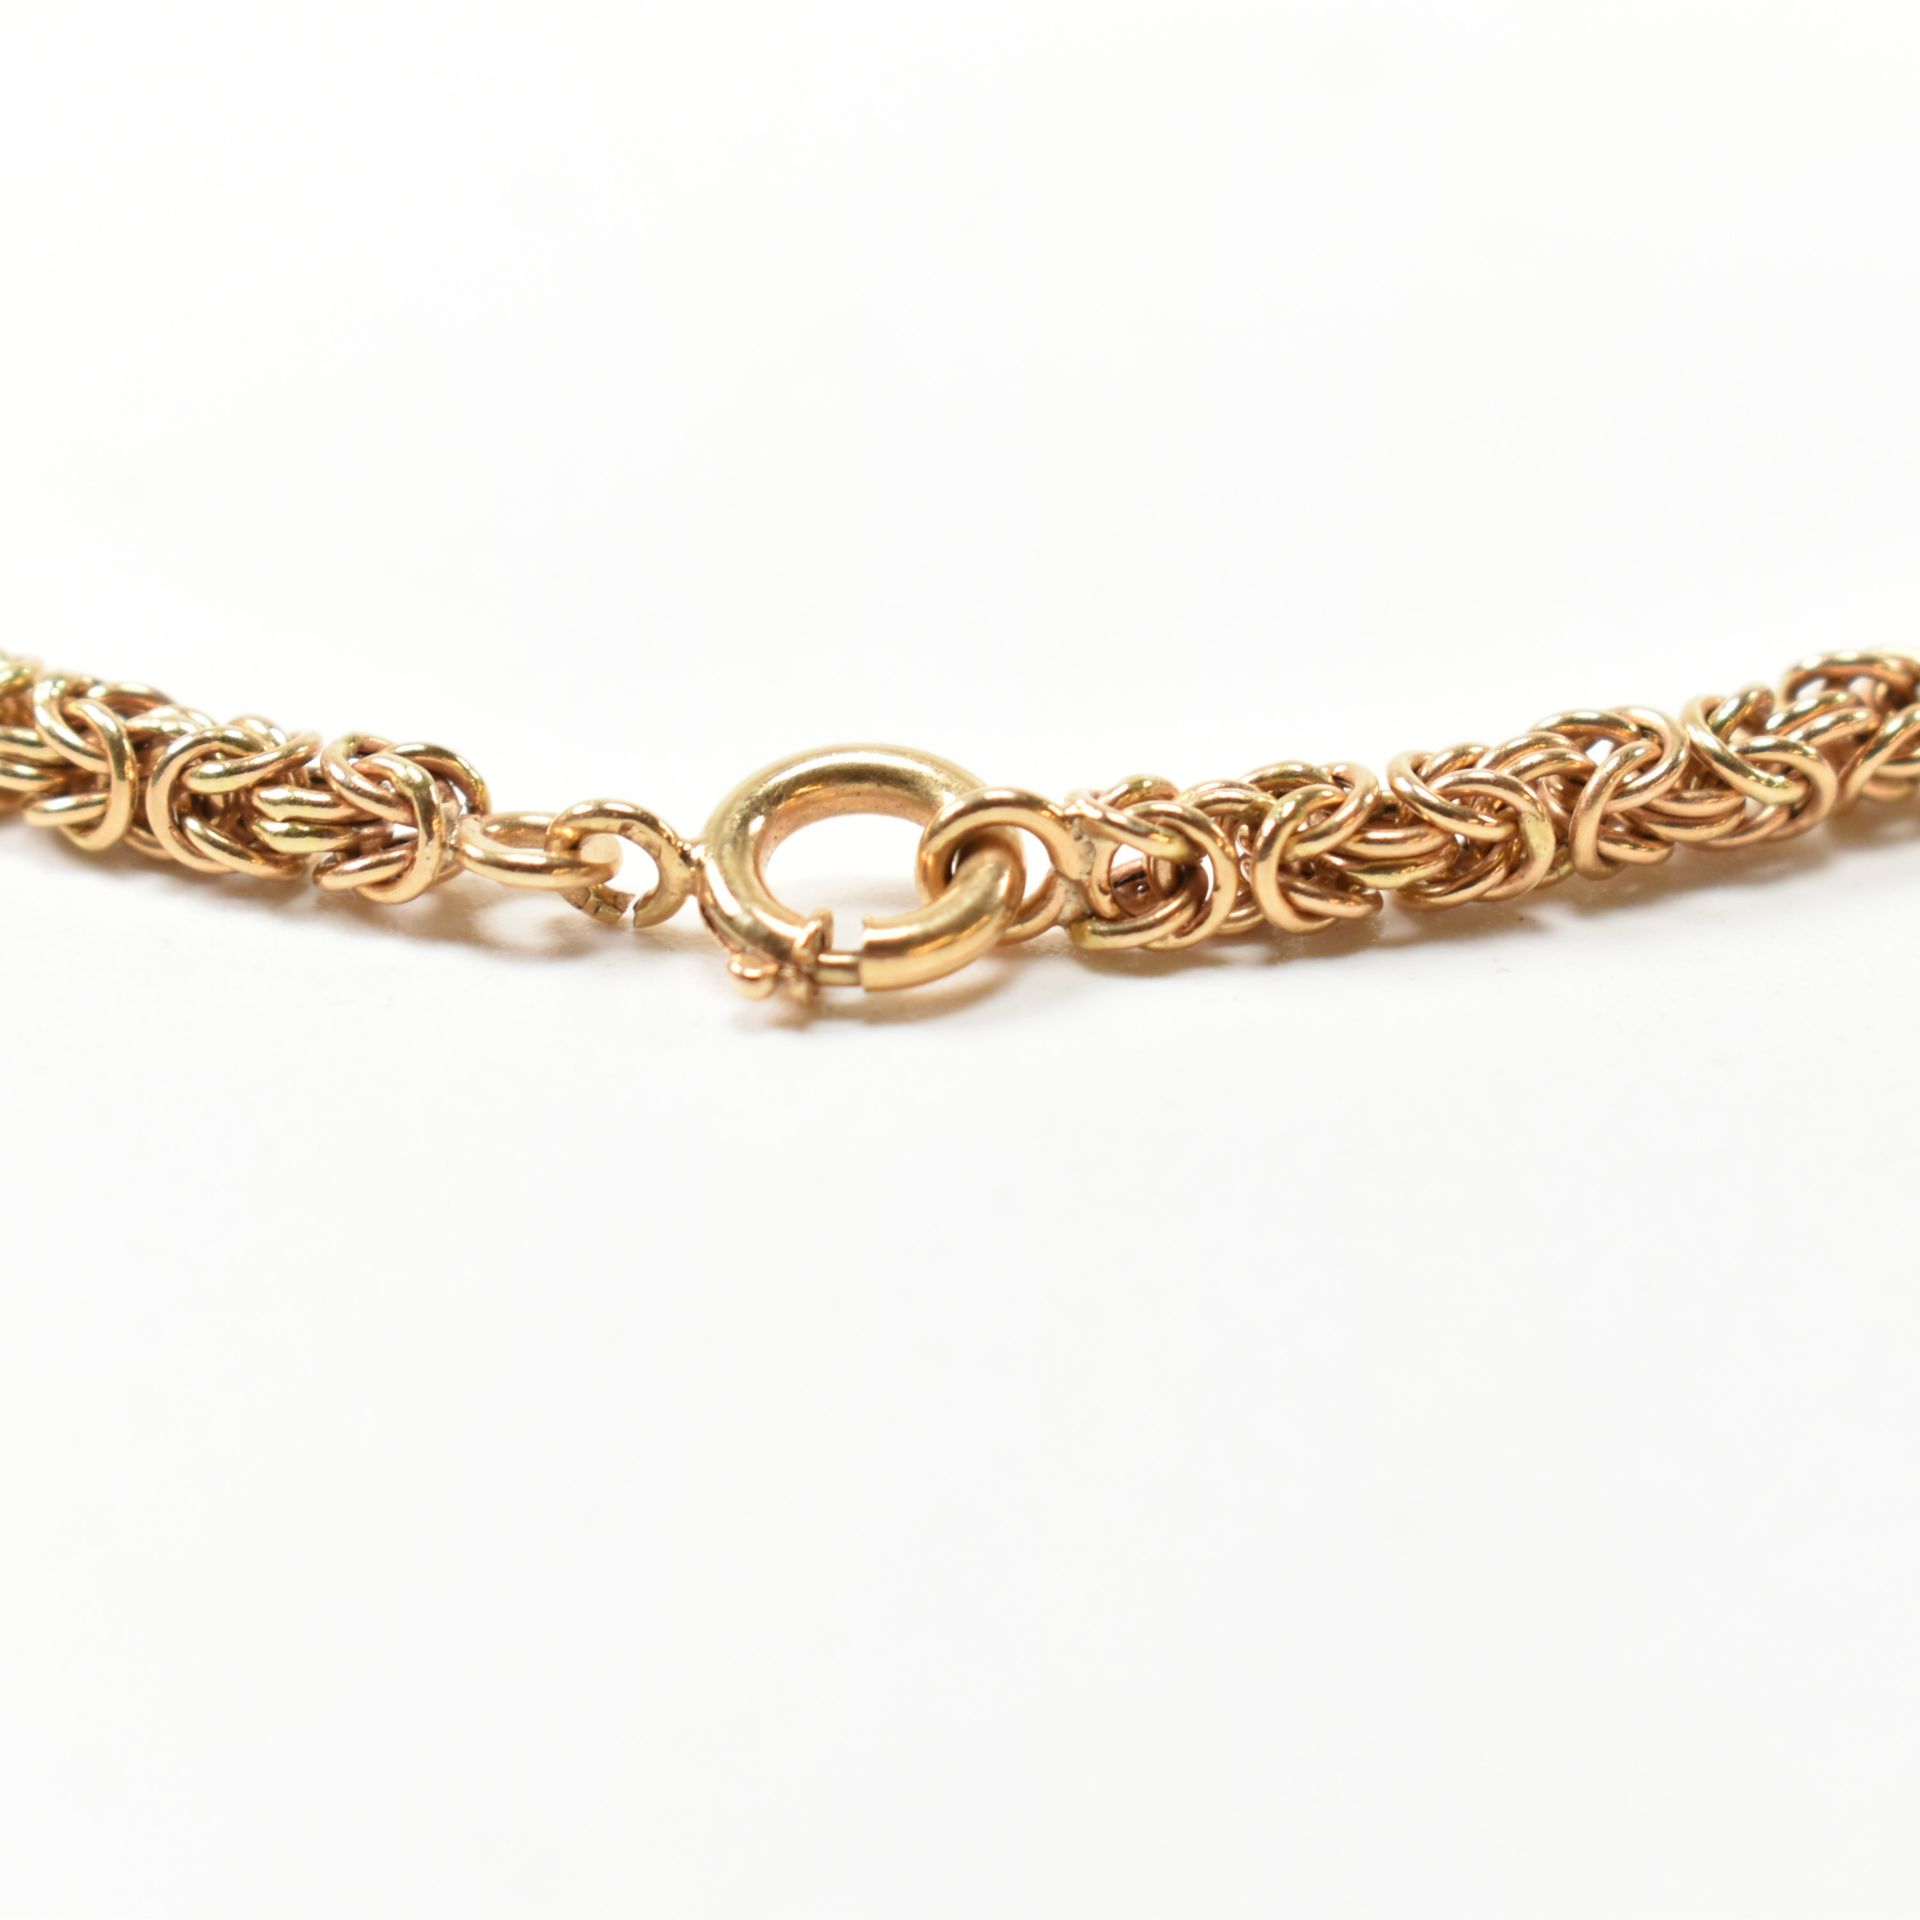 PORTUGUESE 19.2CT GOLD BYZANTINE CHAIN NECKLACE - Image 2 of 4